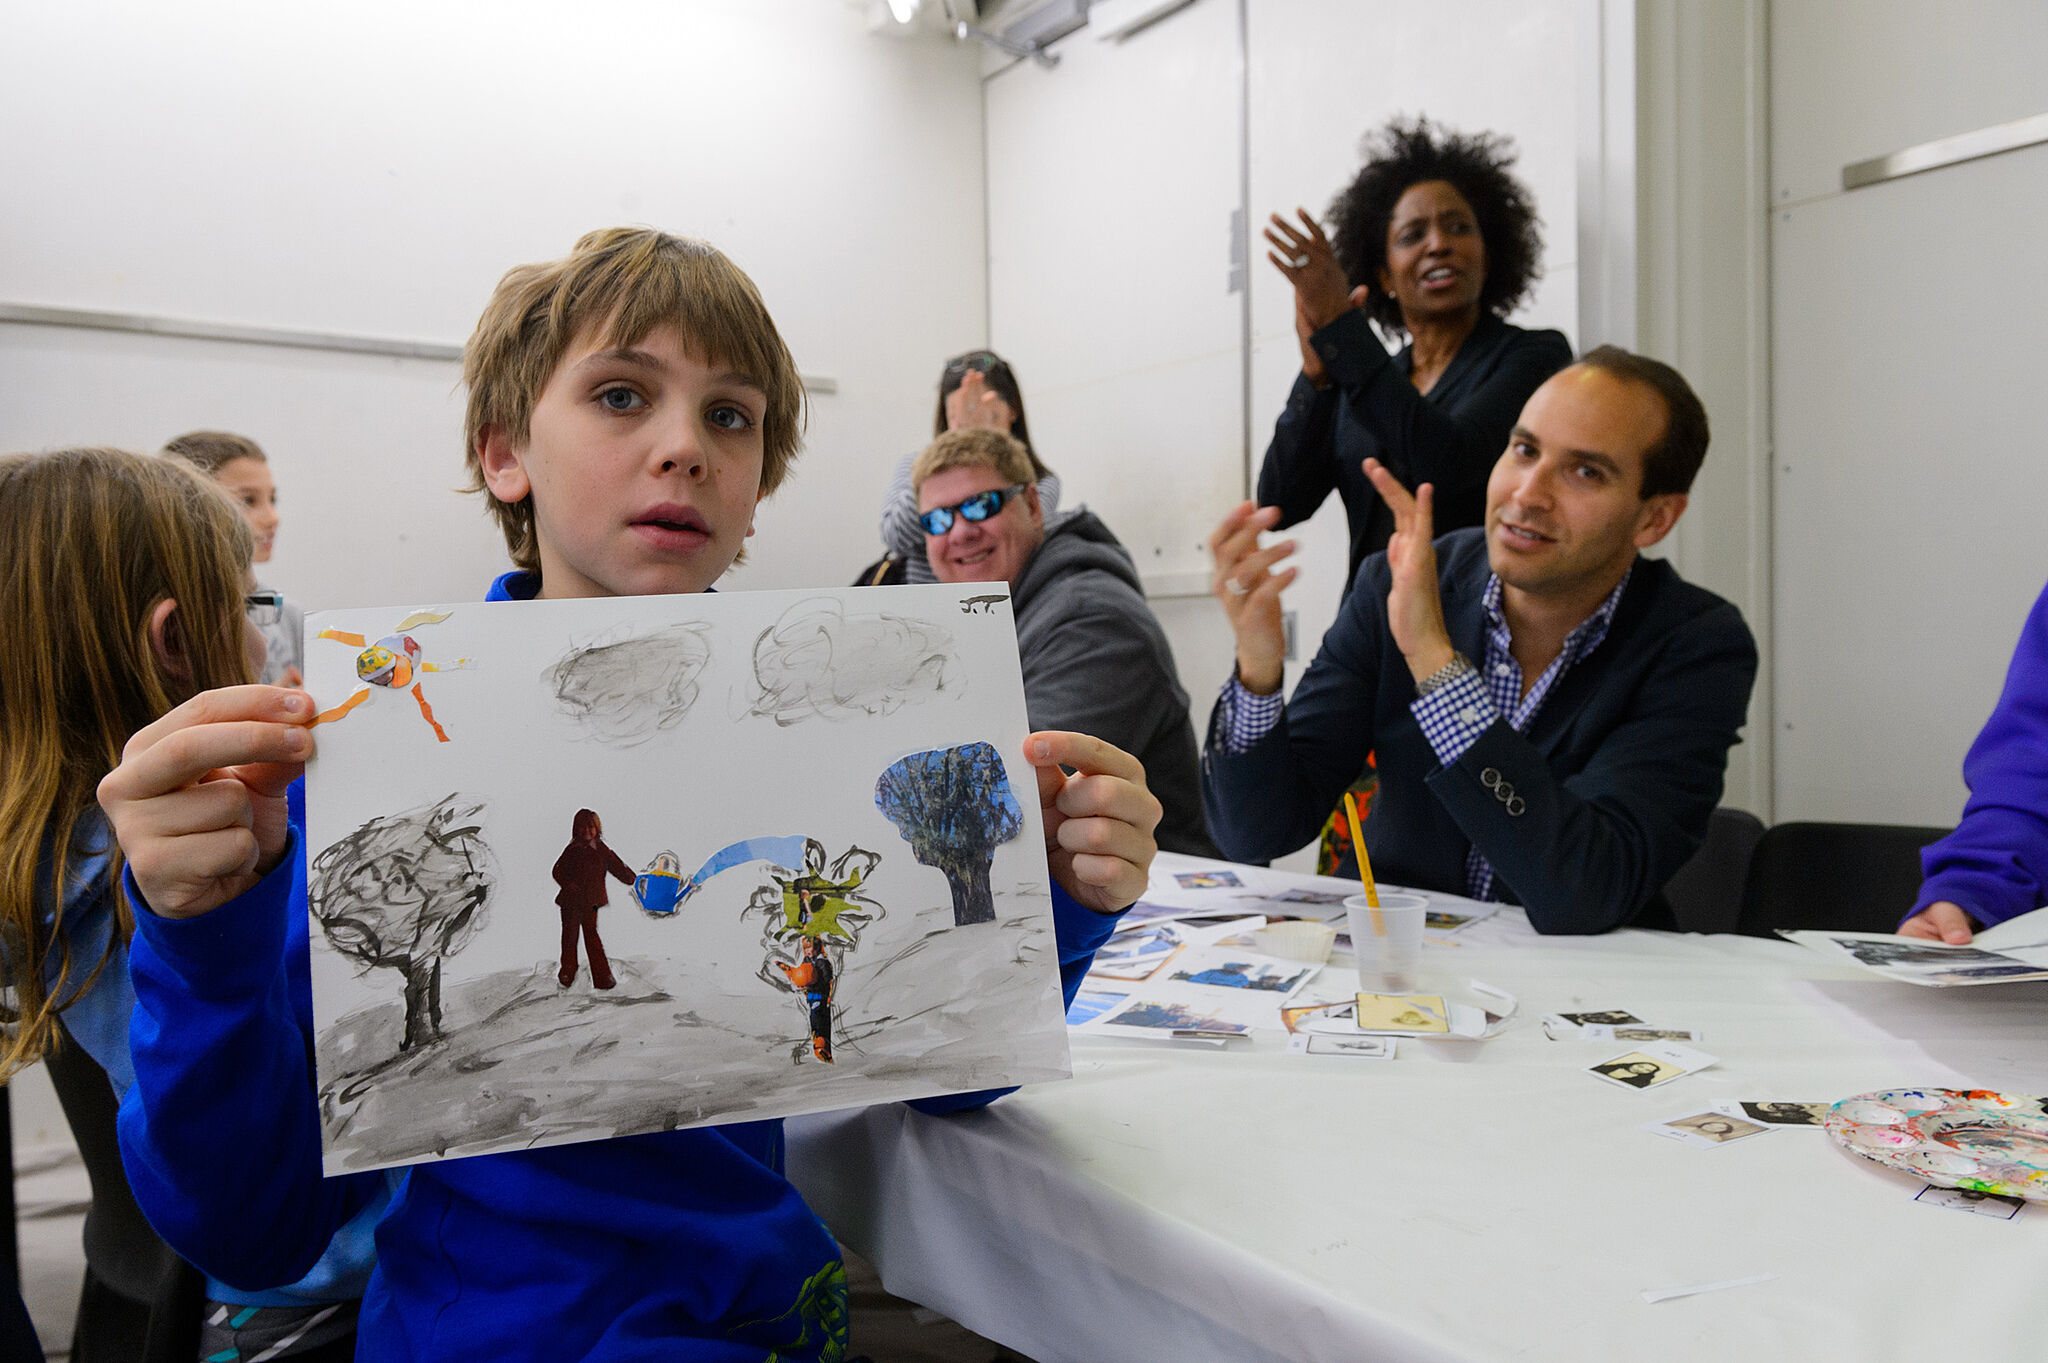 A child shows off his artwork